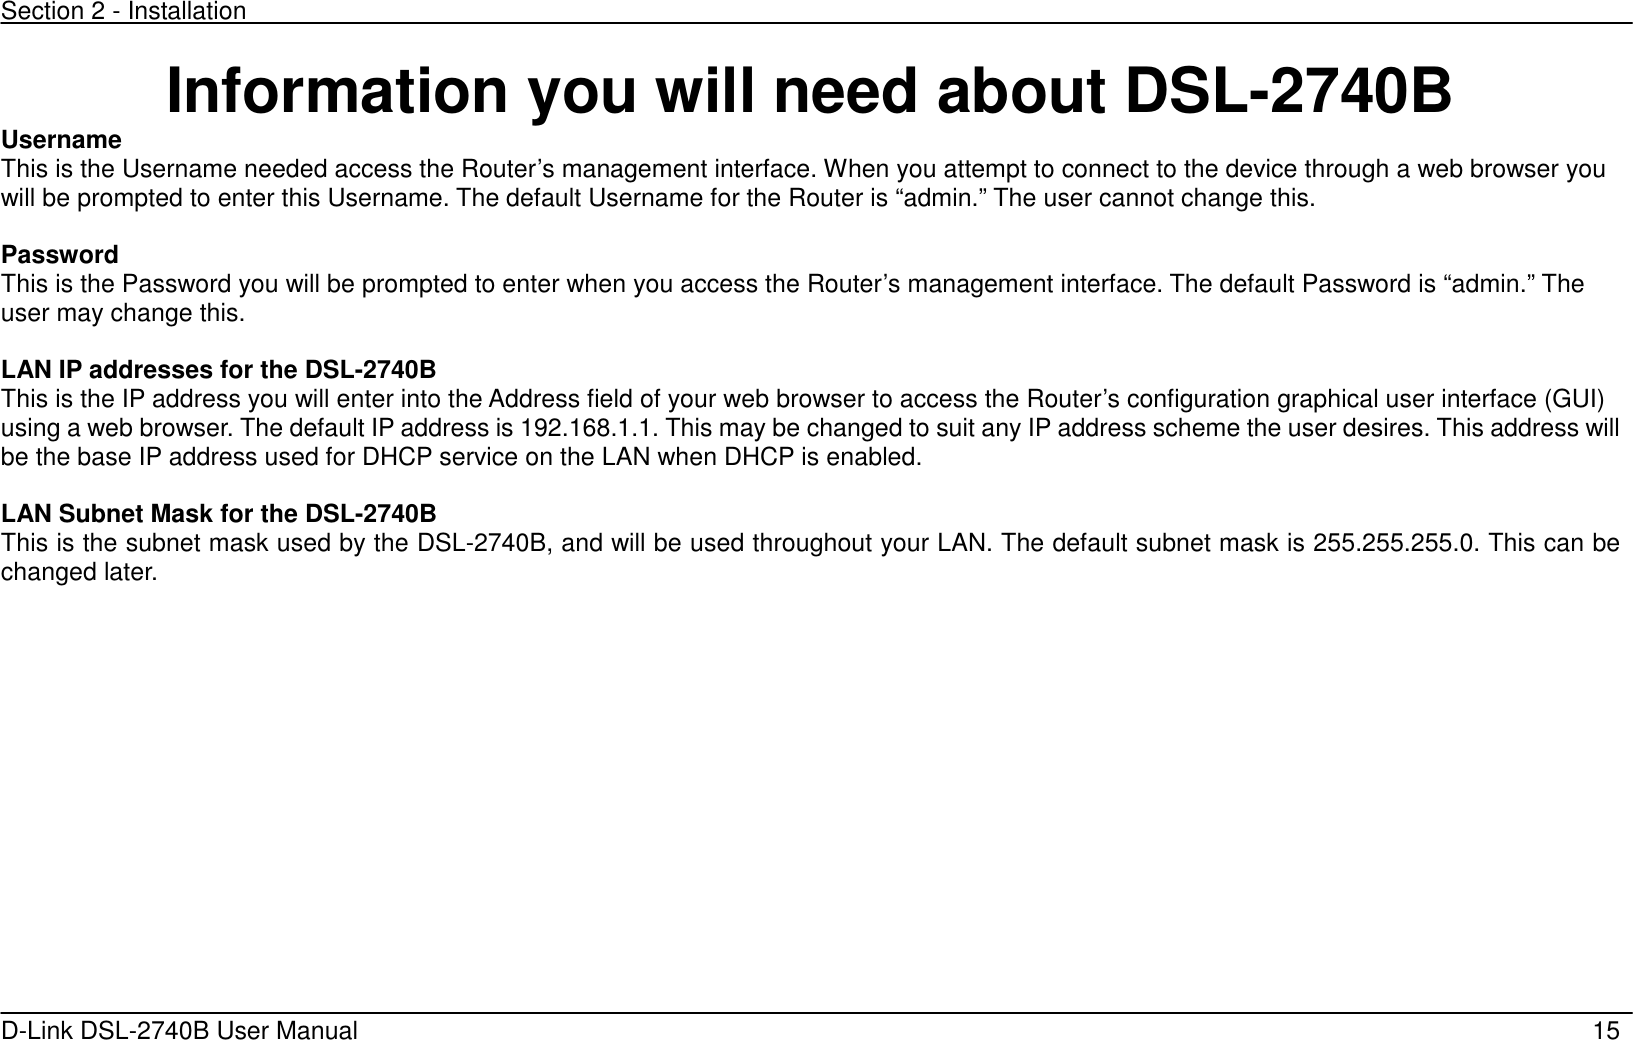 Section 2 - Installation   D-Link DSL-2740B User Manual                                                  15  Information you will need about DSL-2740B Username   This is the Username needed access the Router’s management interface. When you attempt to connect to the device through a web browser you will be prompted to enter this Username. The default Username for the Router is “admin.” The user cannot change this.    Password This is the Password you will be prompted to enter when you access the Router’s management interface. The default Password is “admin.” The user may change this.   LAN IP addresses for the DSL-2740B This is the IP address you will enter into the Address field of your web browser to access the Router’s configuration graphical user interface (GUI) using a web browser. The default IP address is 192.168.1.1. This may be changed to suit any IP address scheme the user desires. This address will be the base IP address used for DHCP service on the LAN when DHCP is enabled.    LAN Subnet Mask for the DSL-2740B This is the subnet mask used by the DSL-2740B, and will be used throughout your LAN. The default subnet mask is 255.255.255.0. This can be changed later.   